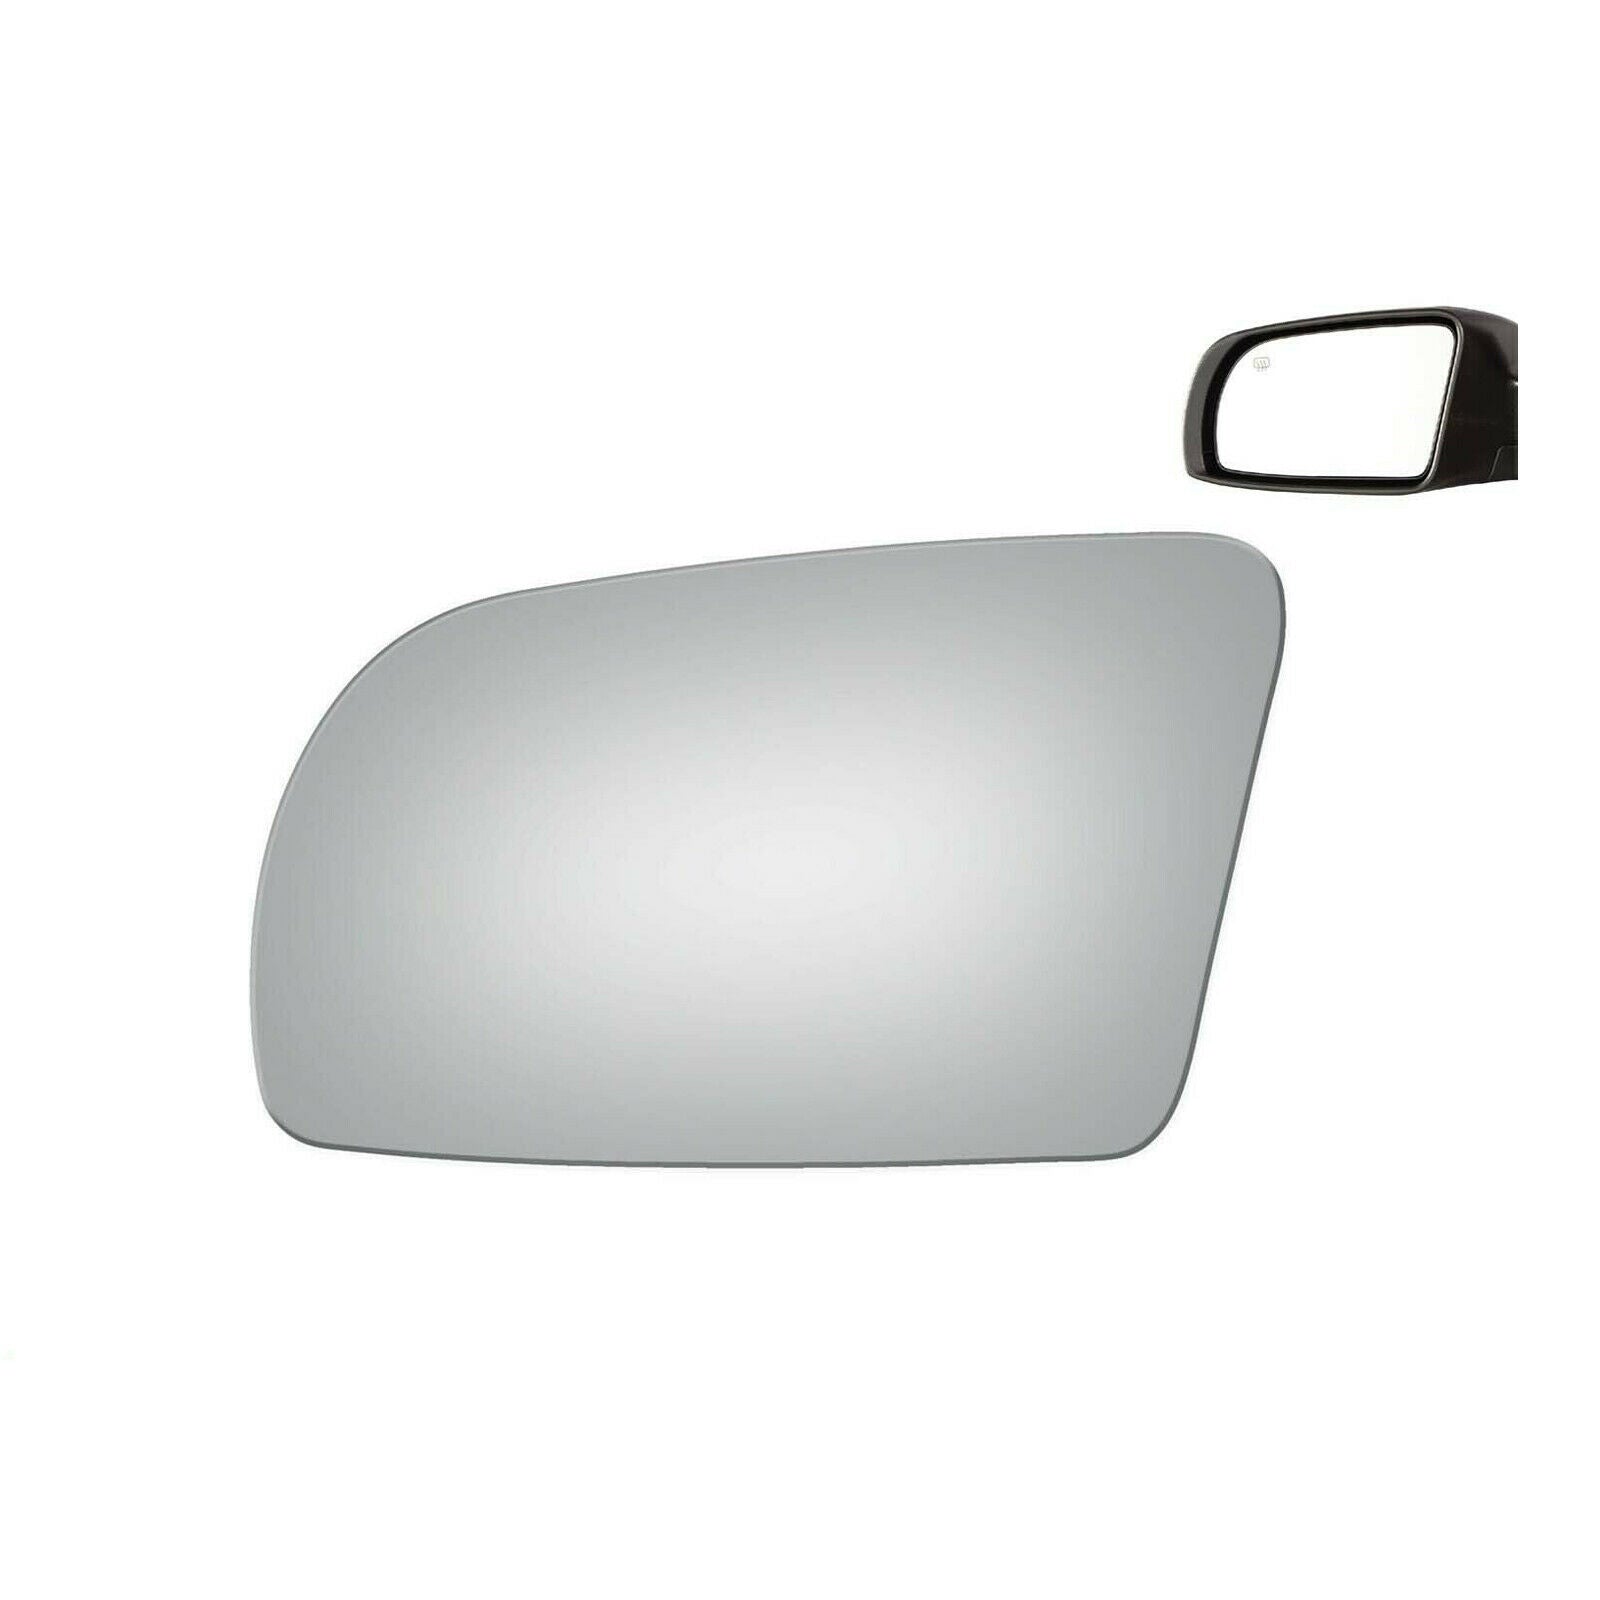 WLLW Replacement Mirror Glass for 2007-2012 Nissan Altima, Driver Left Side LH/Passenger Right Side RH/The Both Sides Flat Convex M-0063